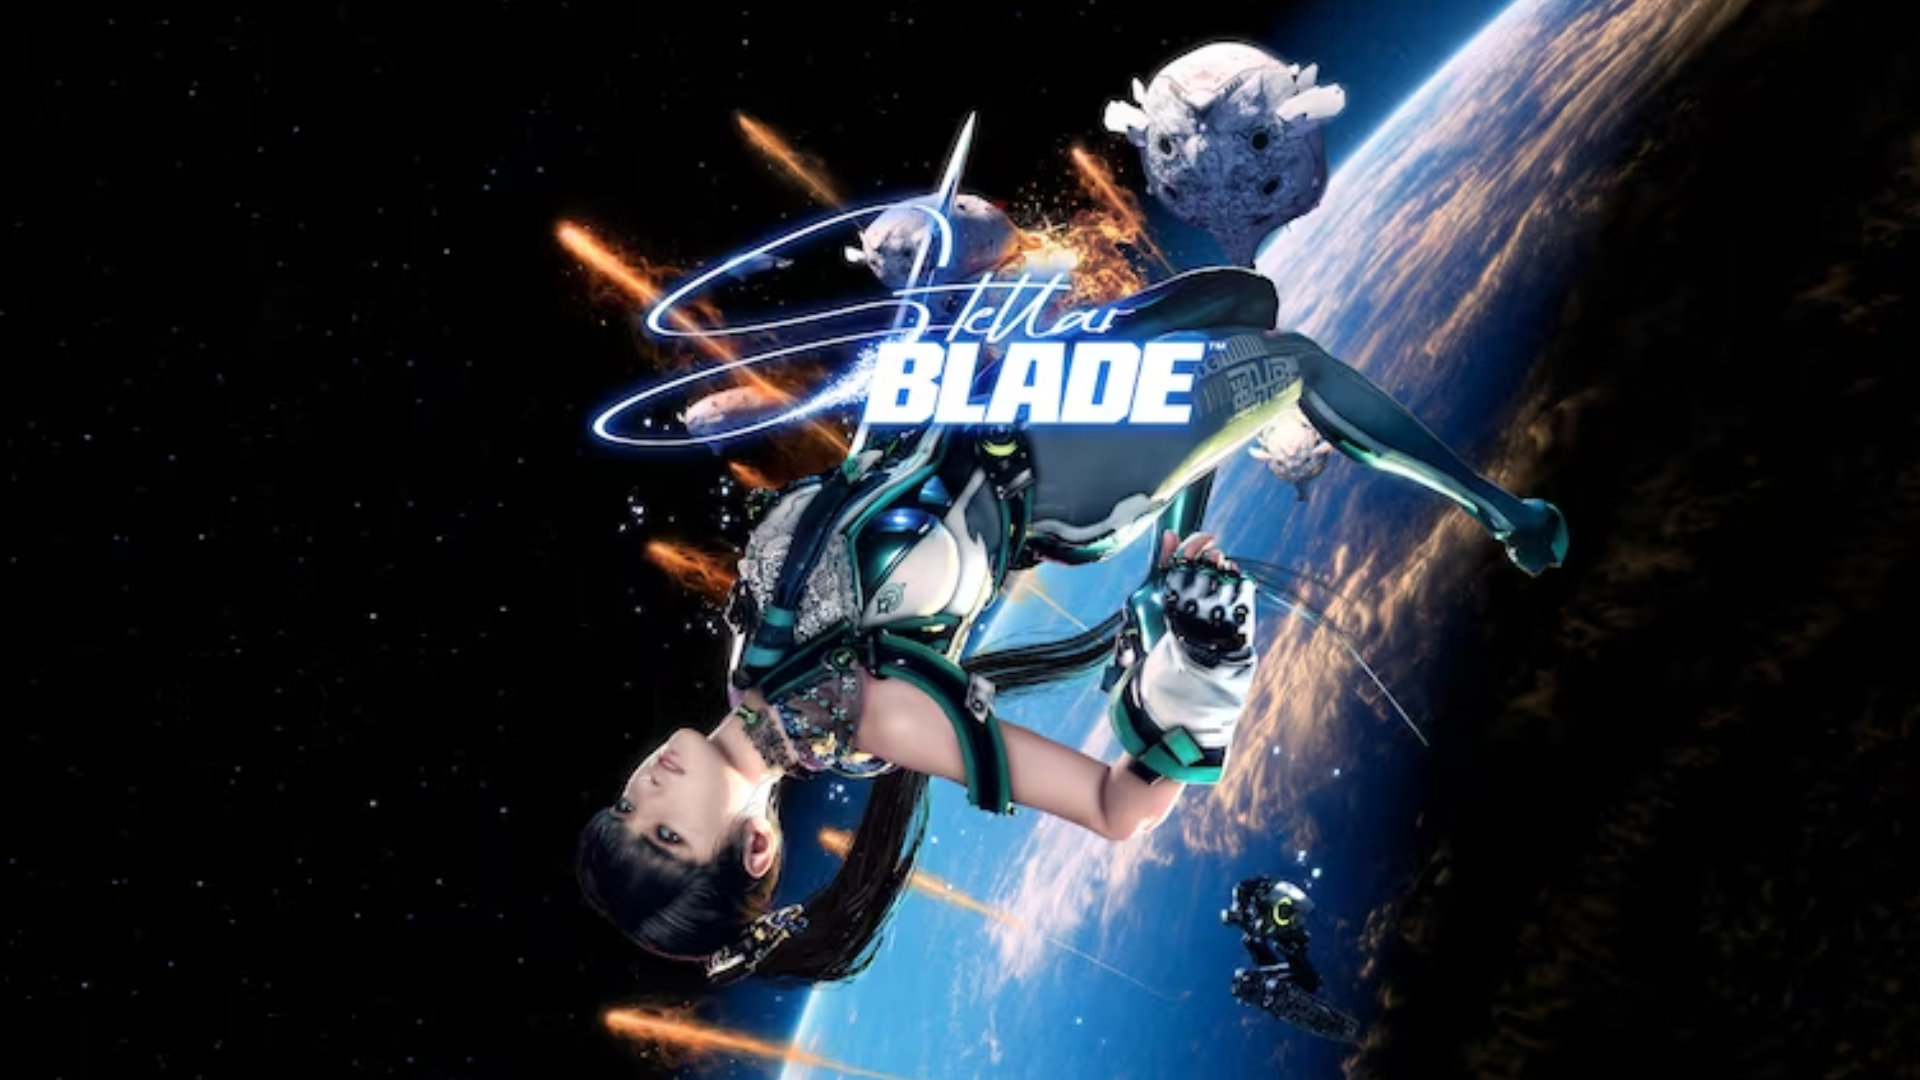 EVE from Stellar Blade with the game's logo